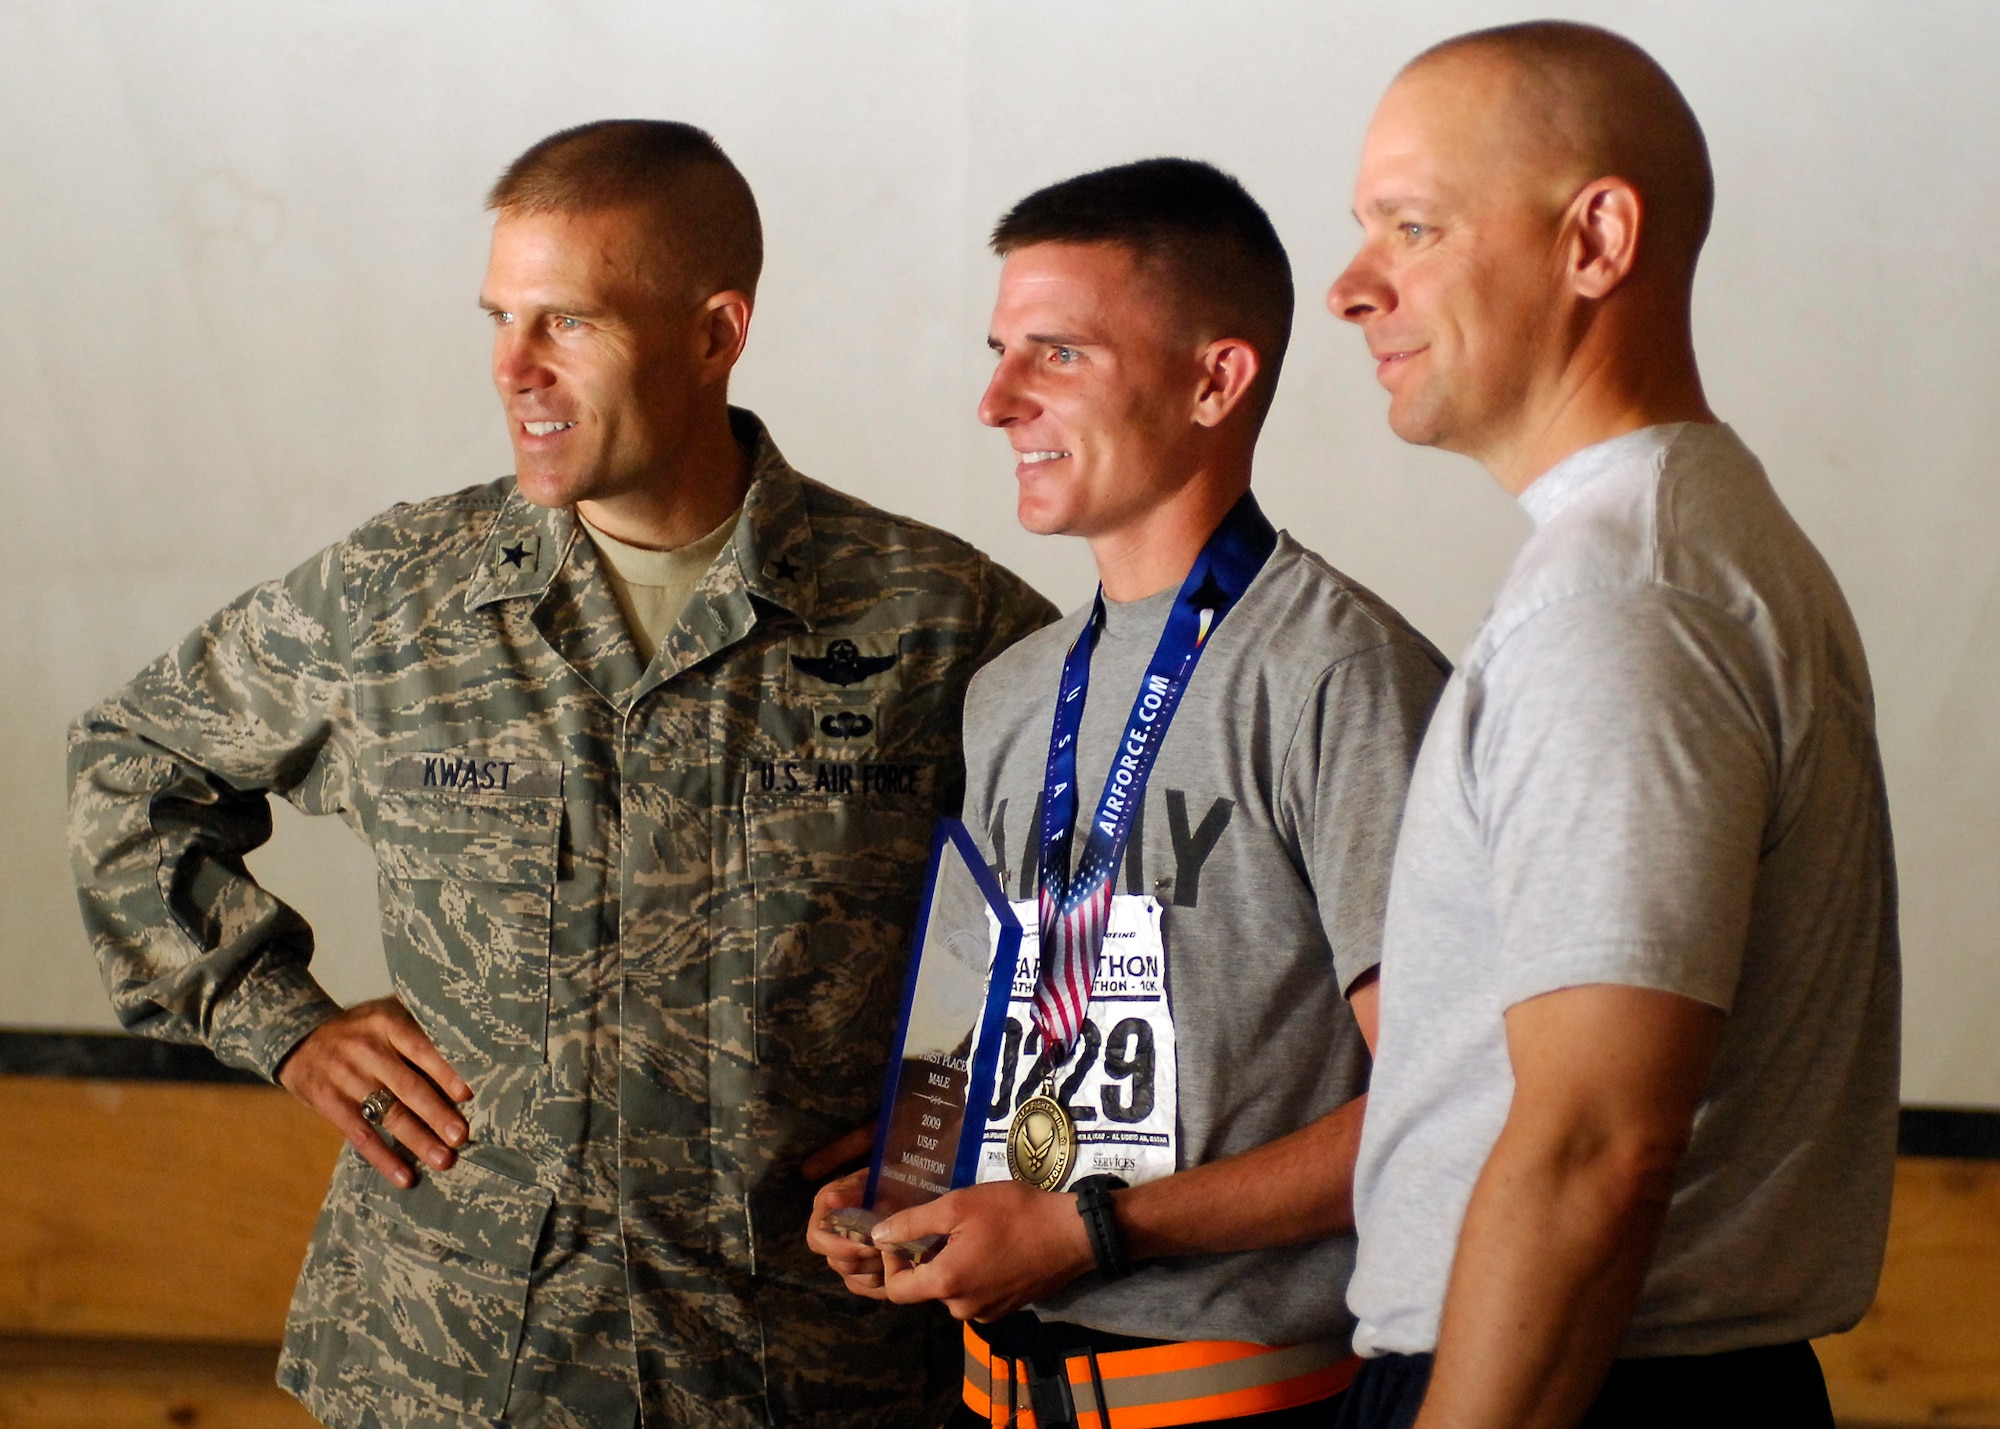 BAGRAM AIRFIELD, Afghanistan -- Brig. Gen Steven Kwast, 455th Air Expeditionary Wing commander, presented the victor's trophy to Army Sgt. Brian Butzler, the winner in the men's division of the Air Force Half Marathon. Chief Master Sgt. Dennis Vannorsdall, 455th Air Expeditionary Wing command chief also was present to offer his congratulations.  (U.S. Air Force photo/Senior Airman Felicia Juenke)